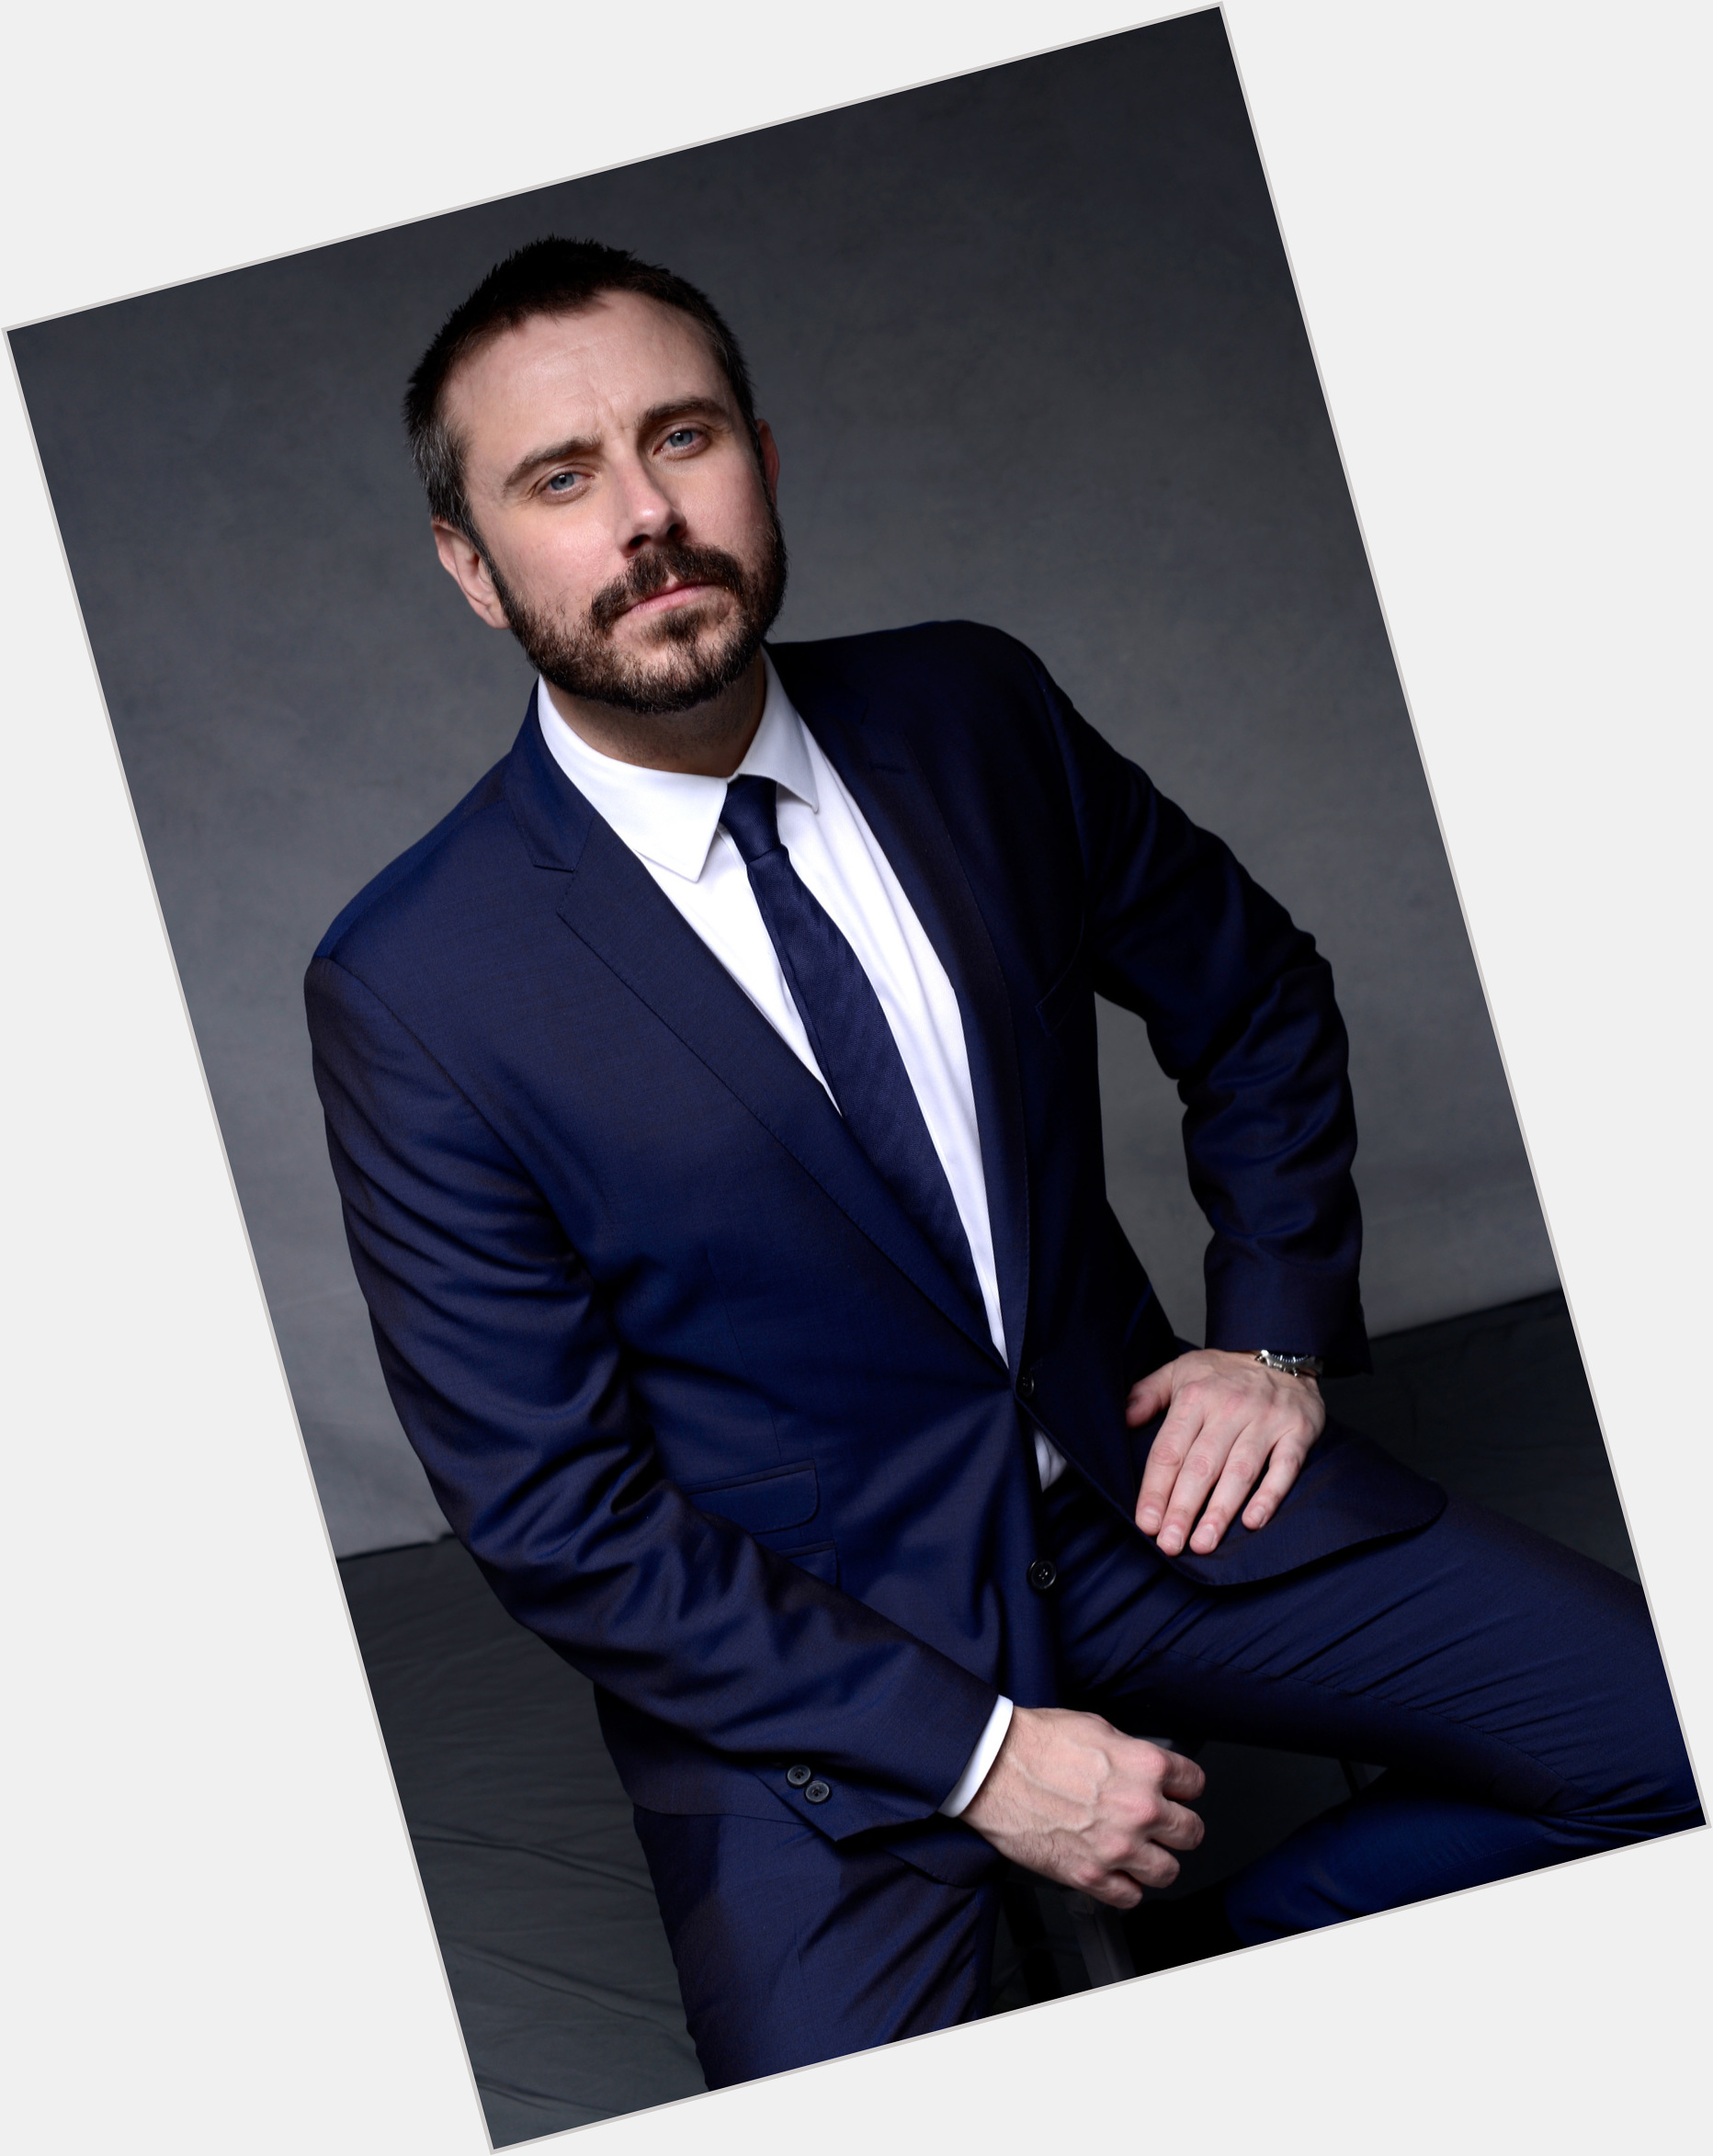 <a href="/hot-men/jeremy-scahill/where-dating-news-photos">Jeremy Scahill</a> Average body,  dark brown hair & hairstyles